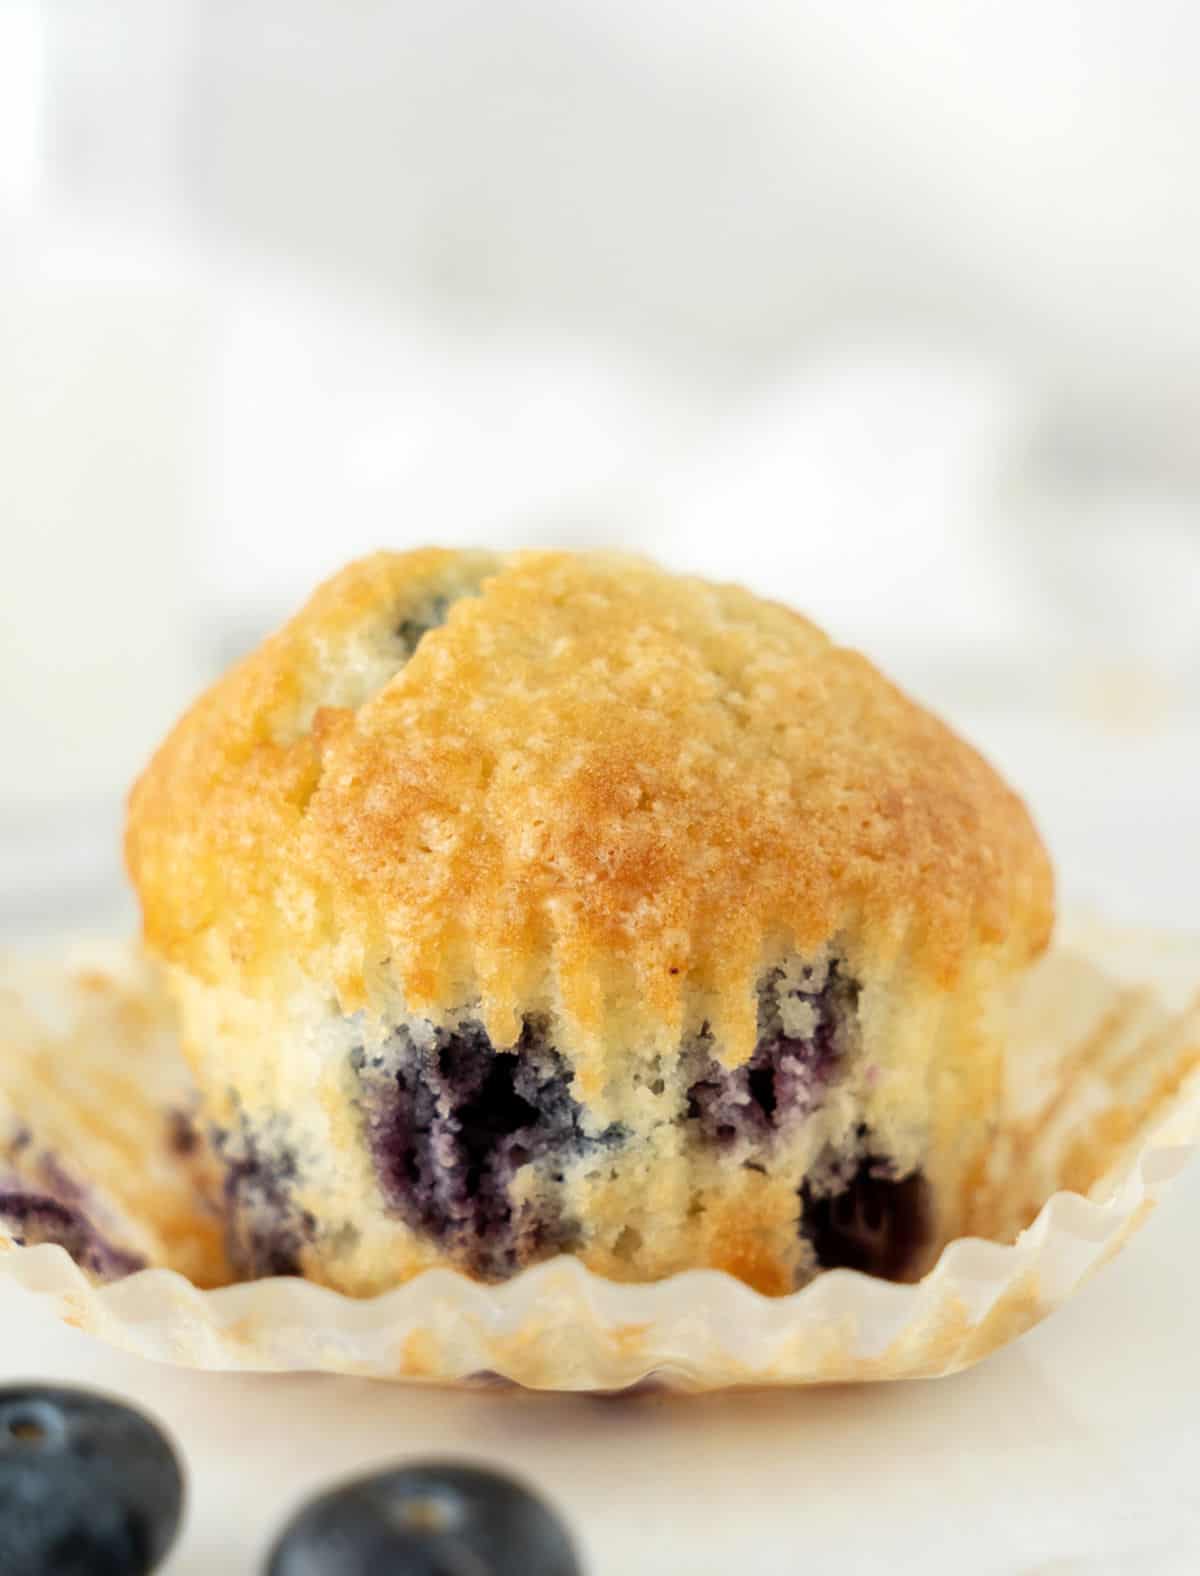 Single blueberry muffin in an opened paper liner. White surface, grey white background.